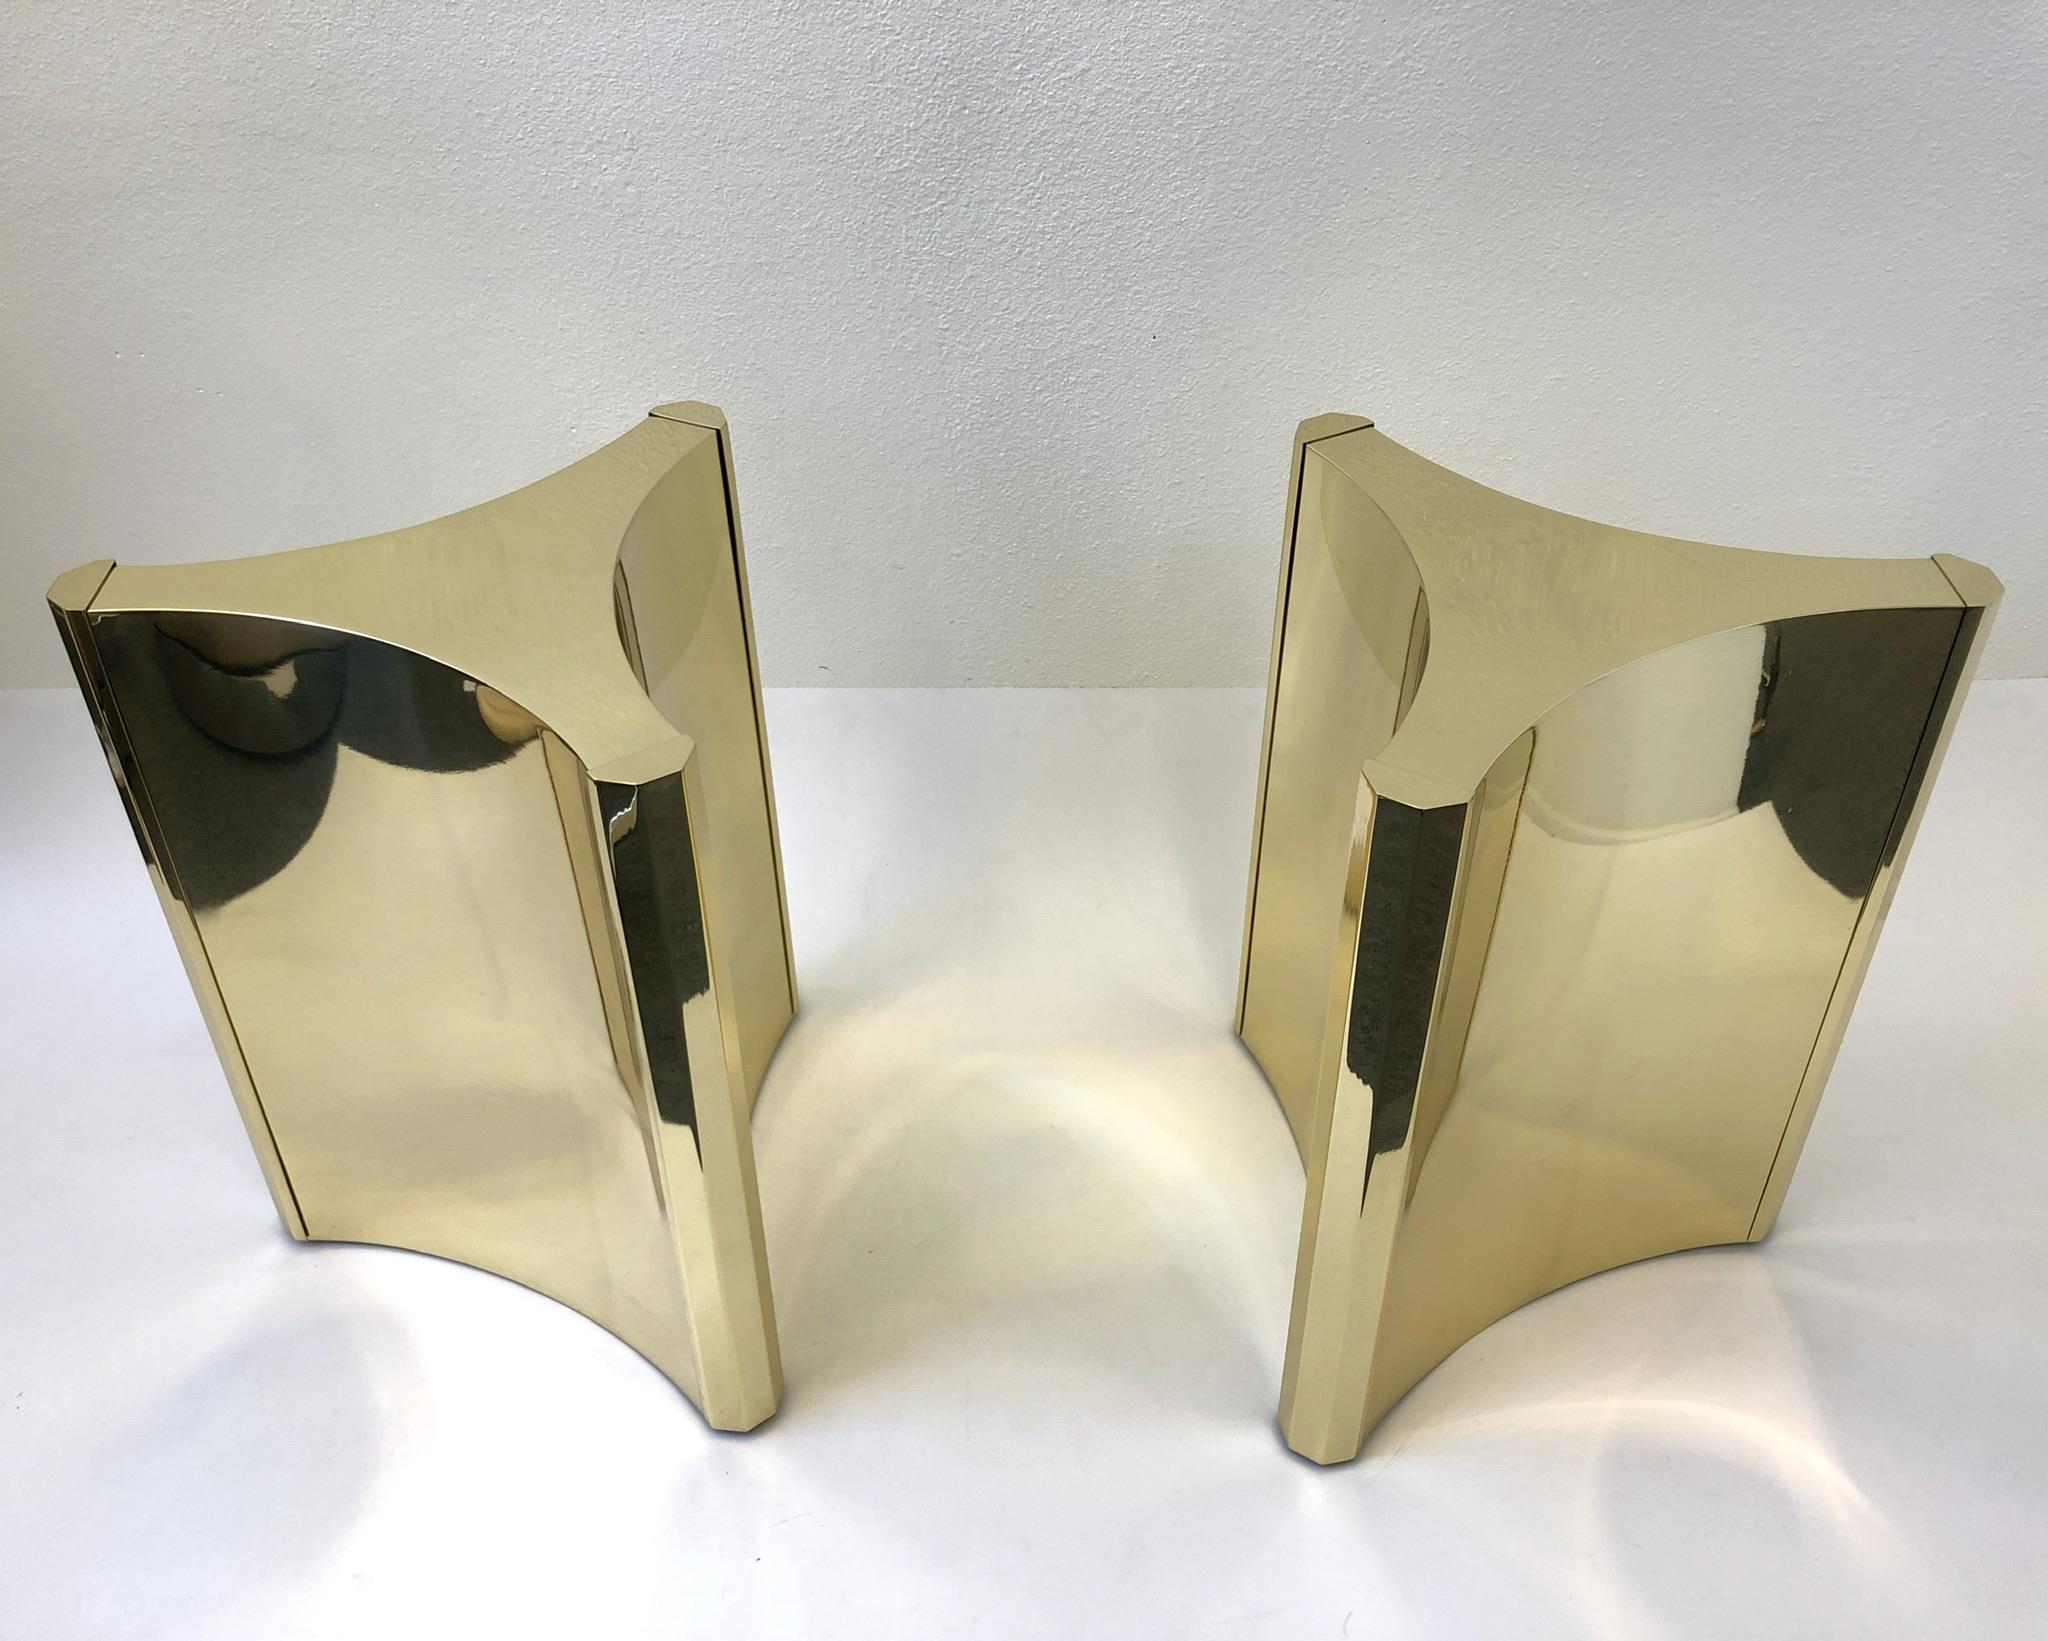 A beautiful pair of polished brass “Trilobo” dining table bases, Design in the 1970s by Mastercraft. The bases have adjustable glides for uneven floors.
Each base is 27.75” high 19” diameter.